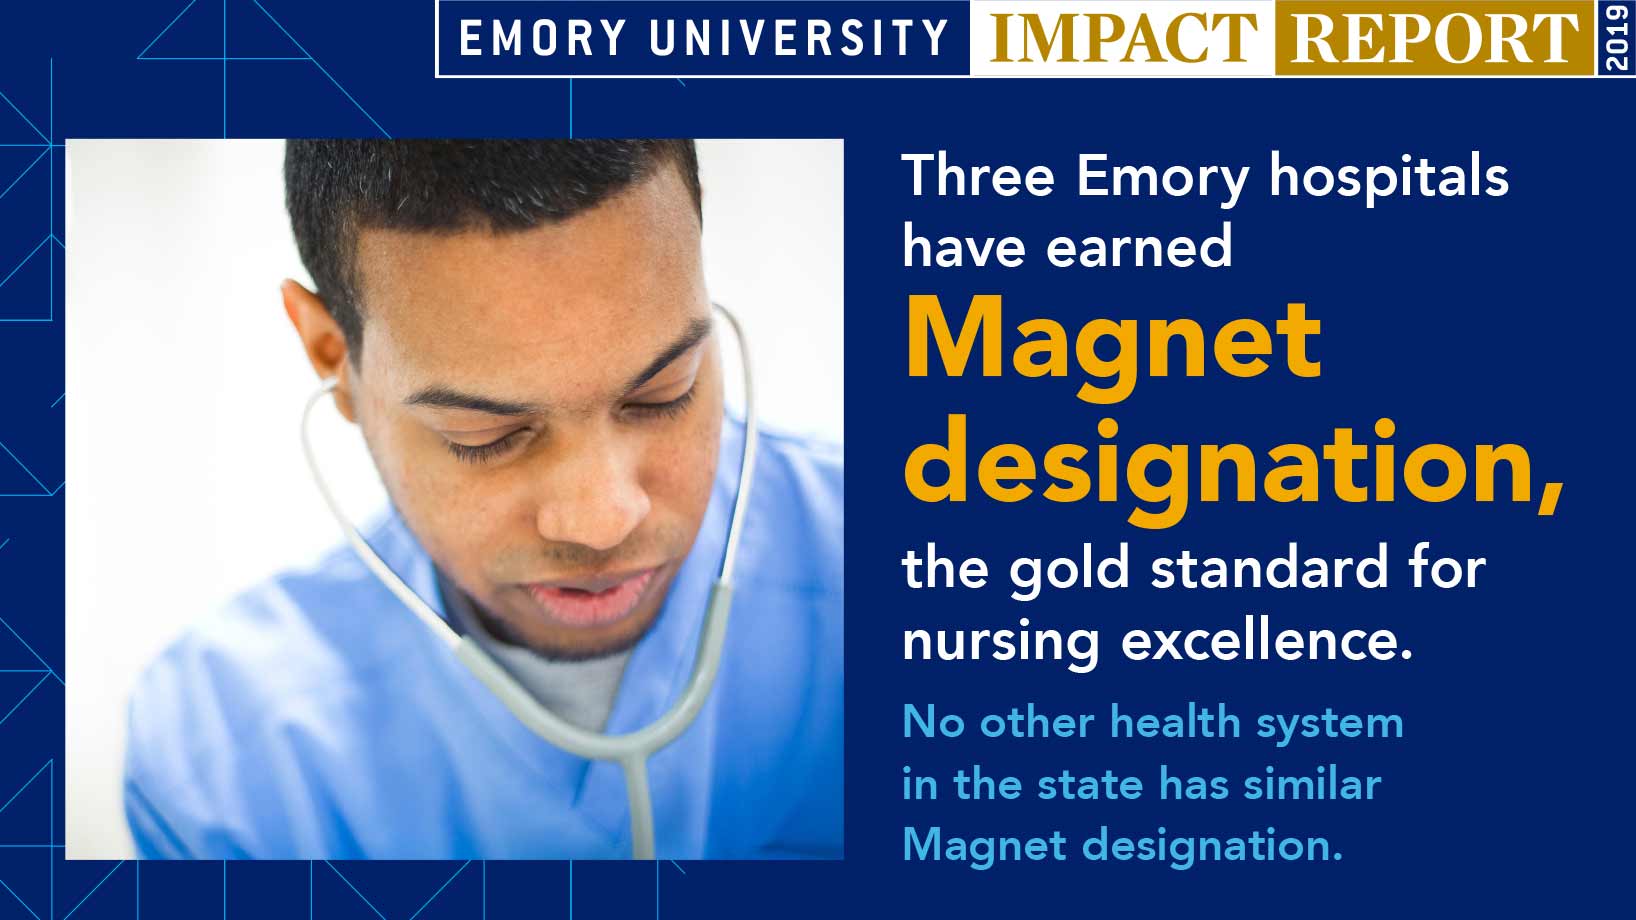 Three Emory hospitals have earned Magnet designation, the gold standard for nursing excellence. No other health system in the state has similar Magnet designation.